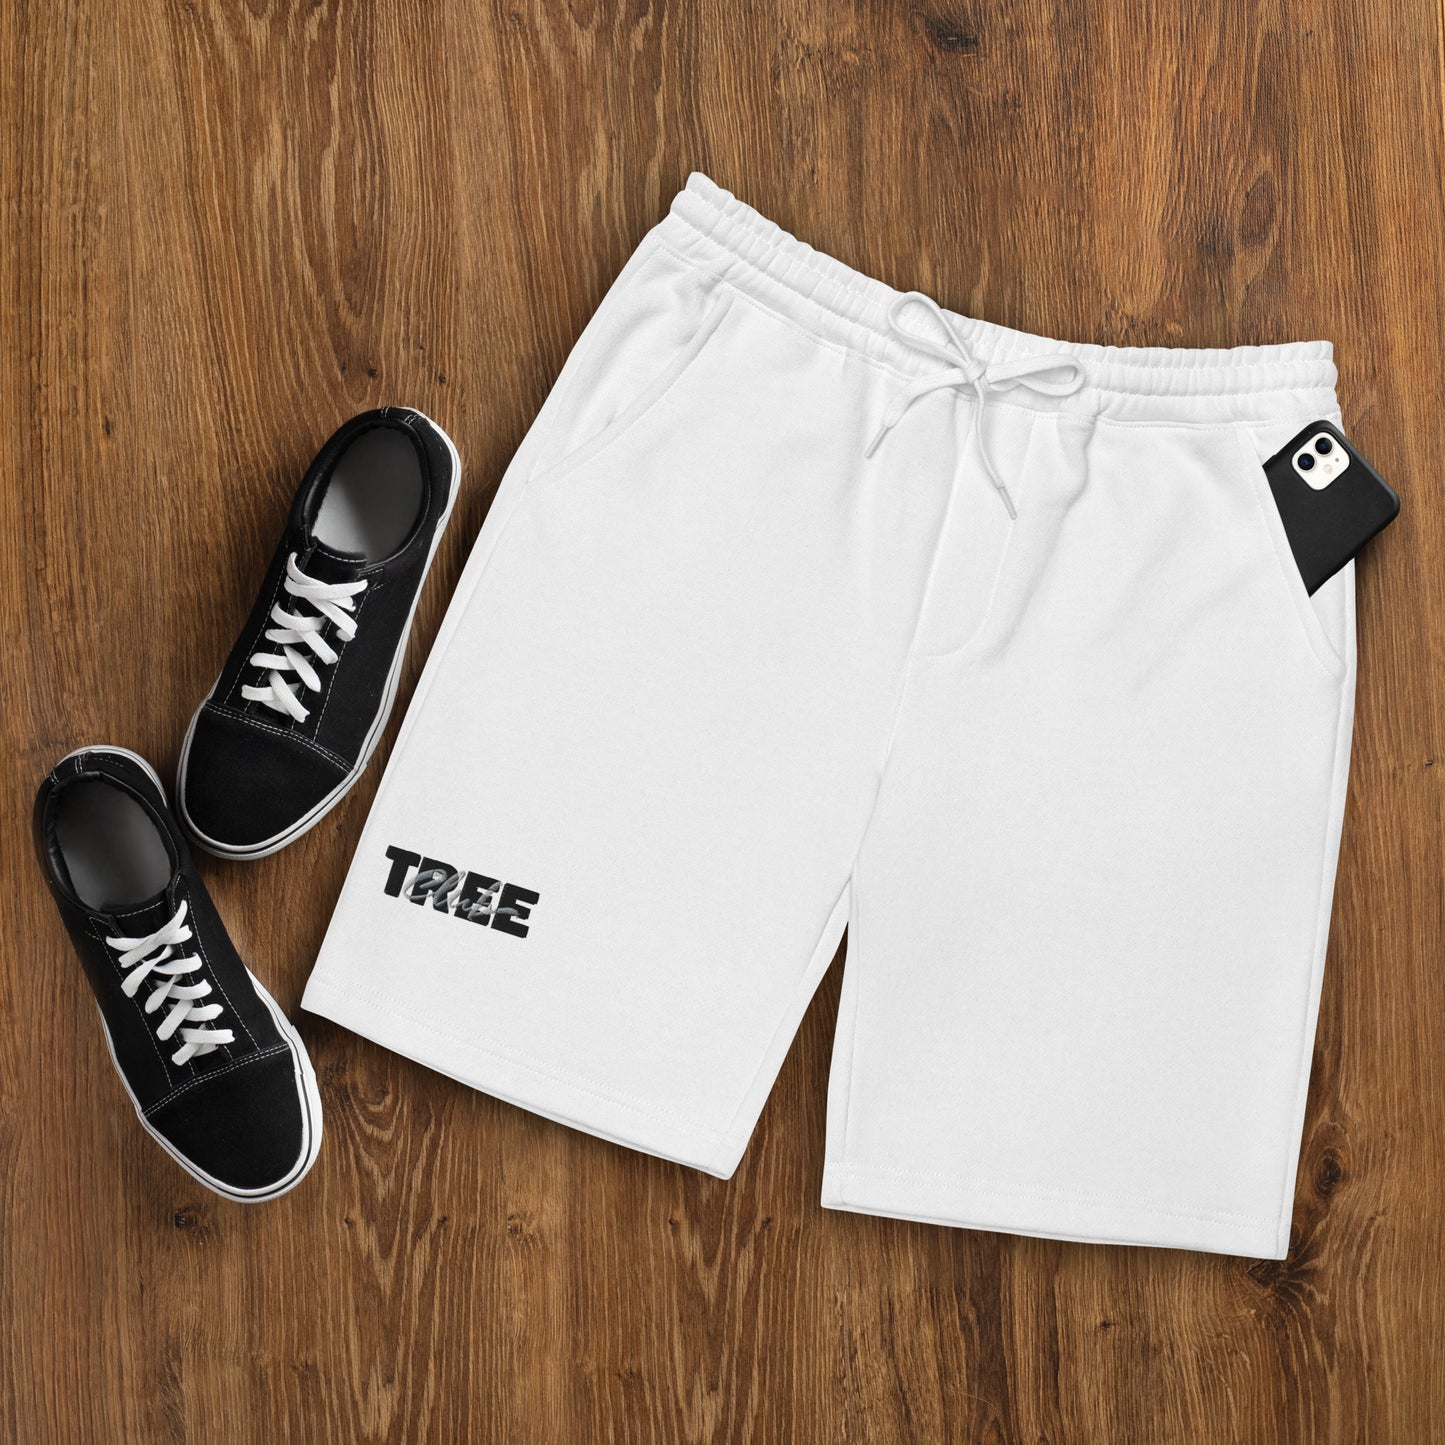 Tree Club Comfy embroidered shorts